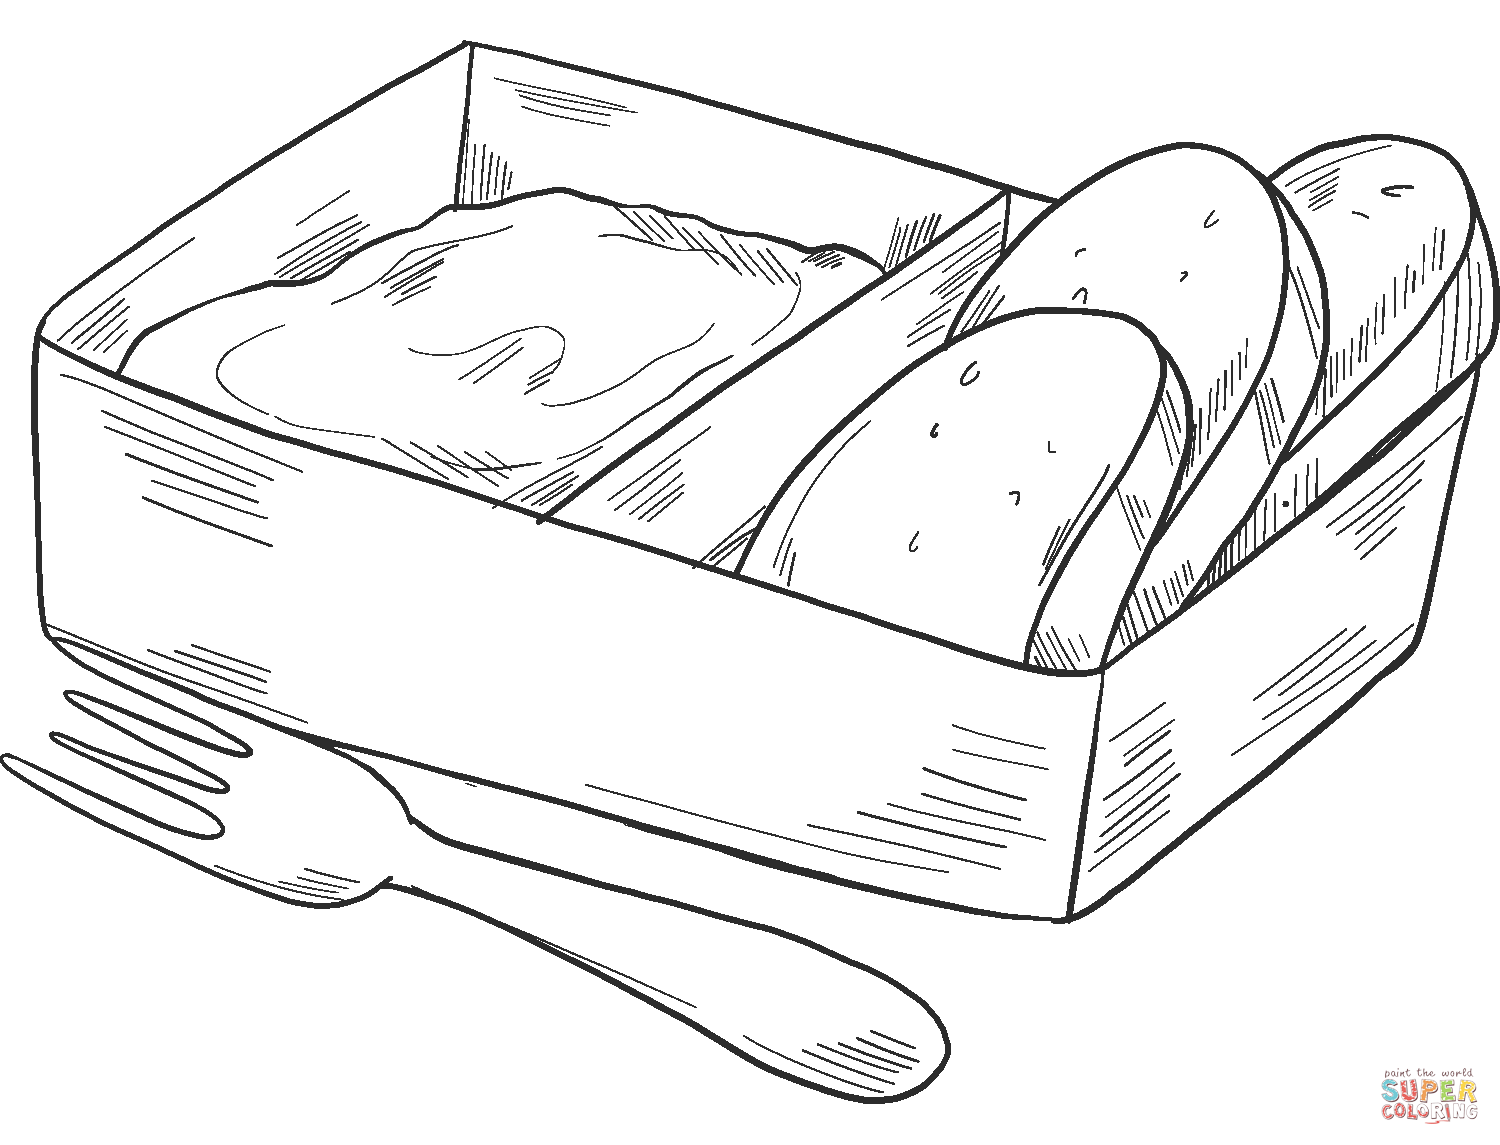 Lunch Box coloring page | Free Printable Coloring Pages